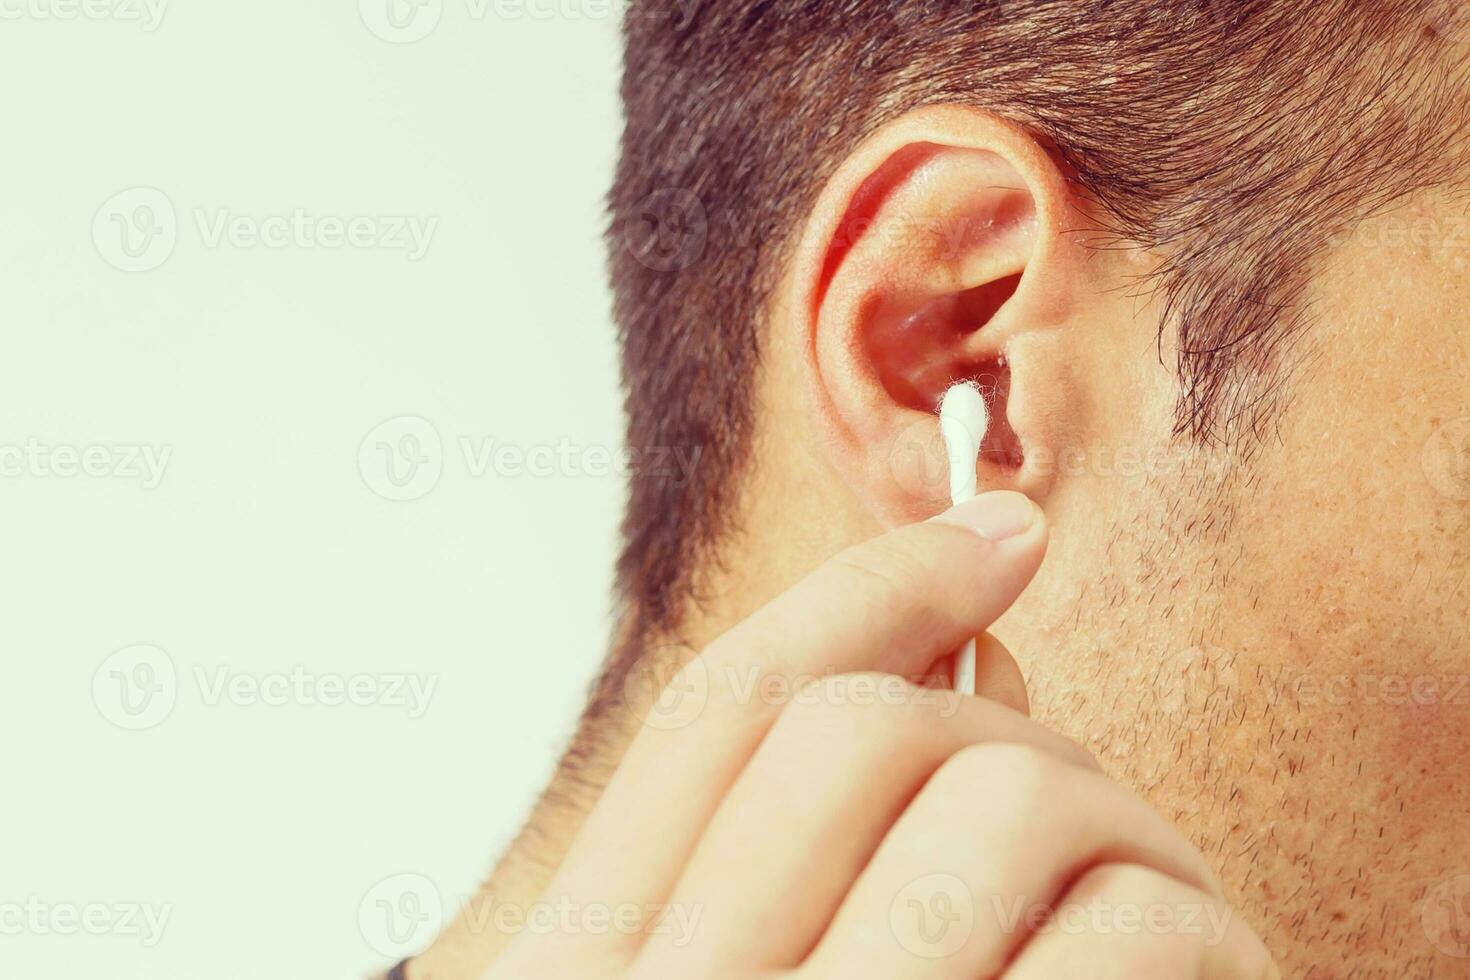 A young man cleans dirty ears with a white cotton swab on a white background. Medical sterile cotton swab in a man's hand close-up. photo